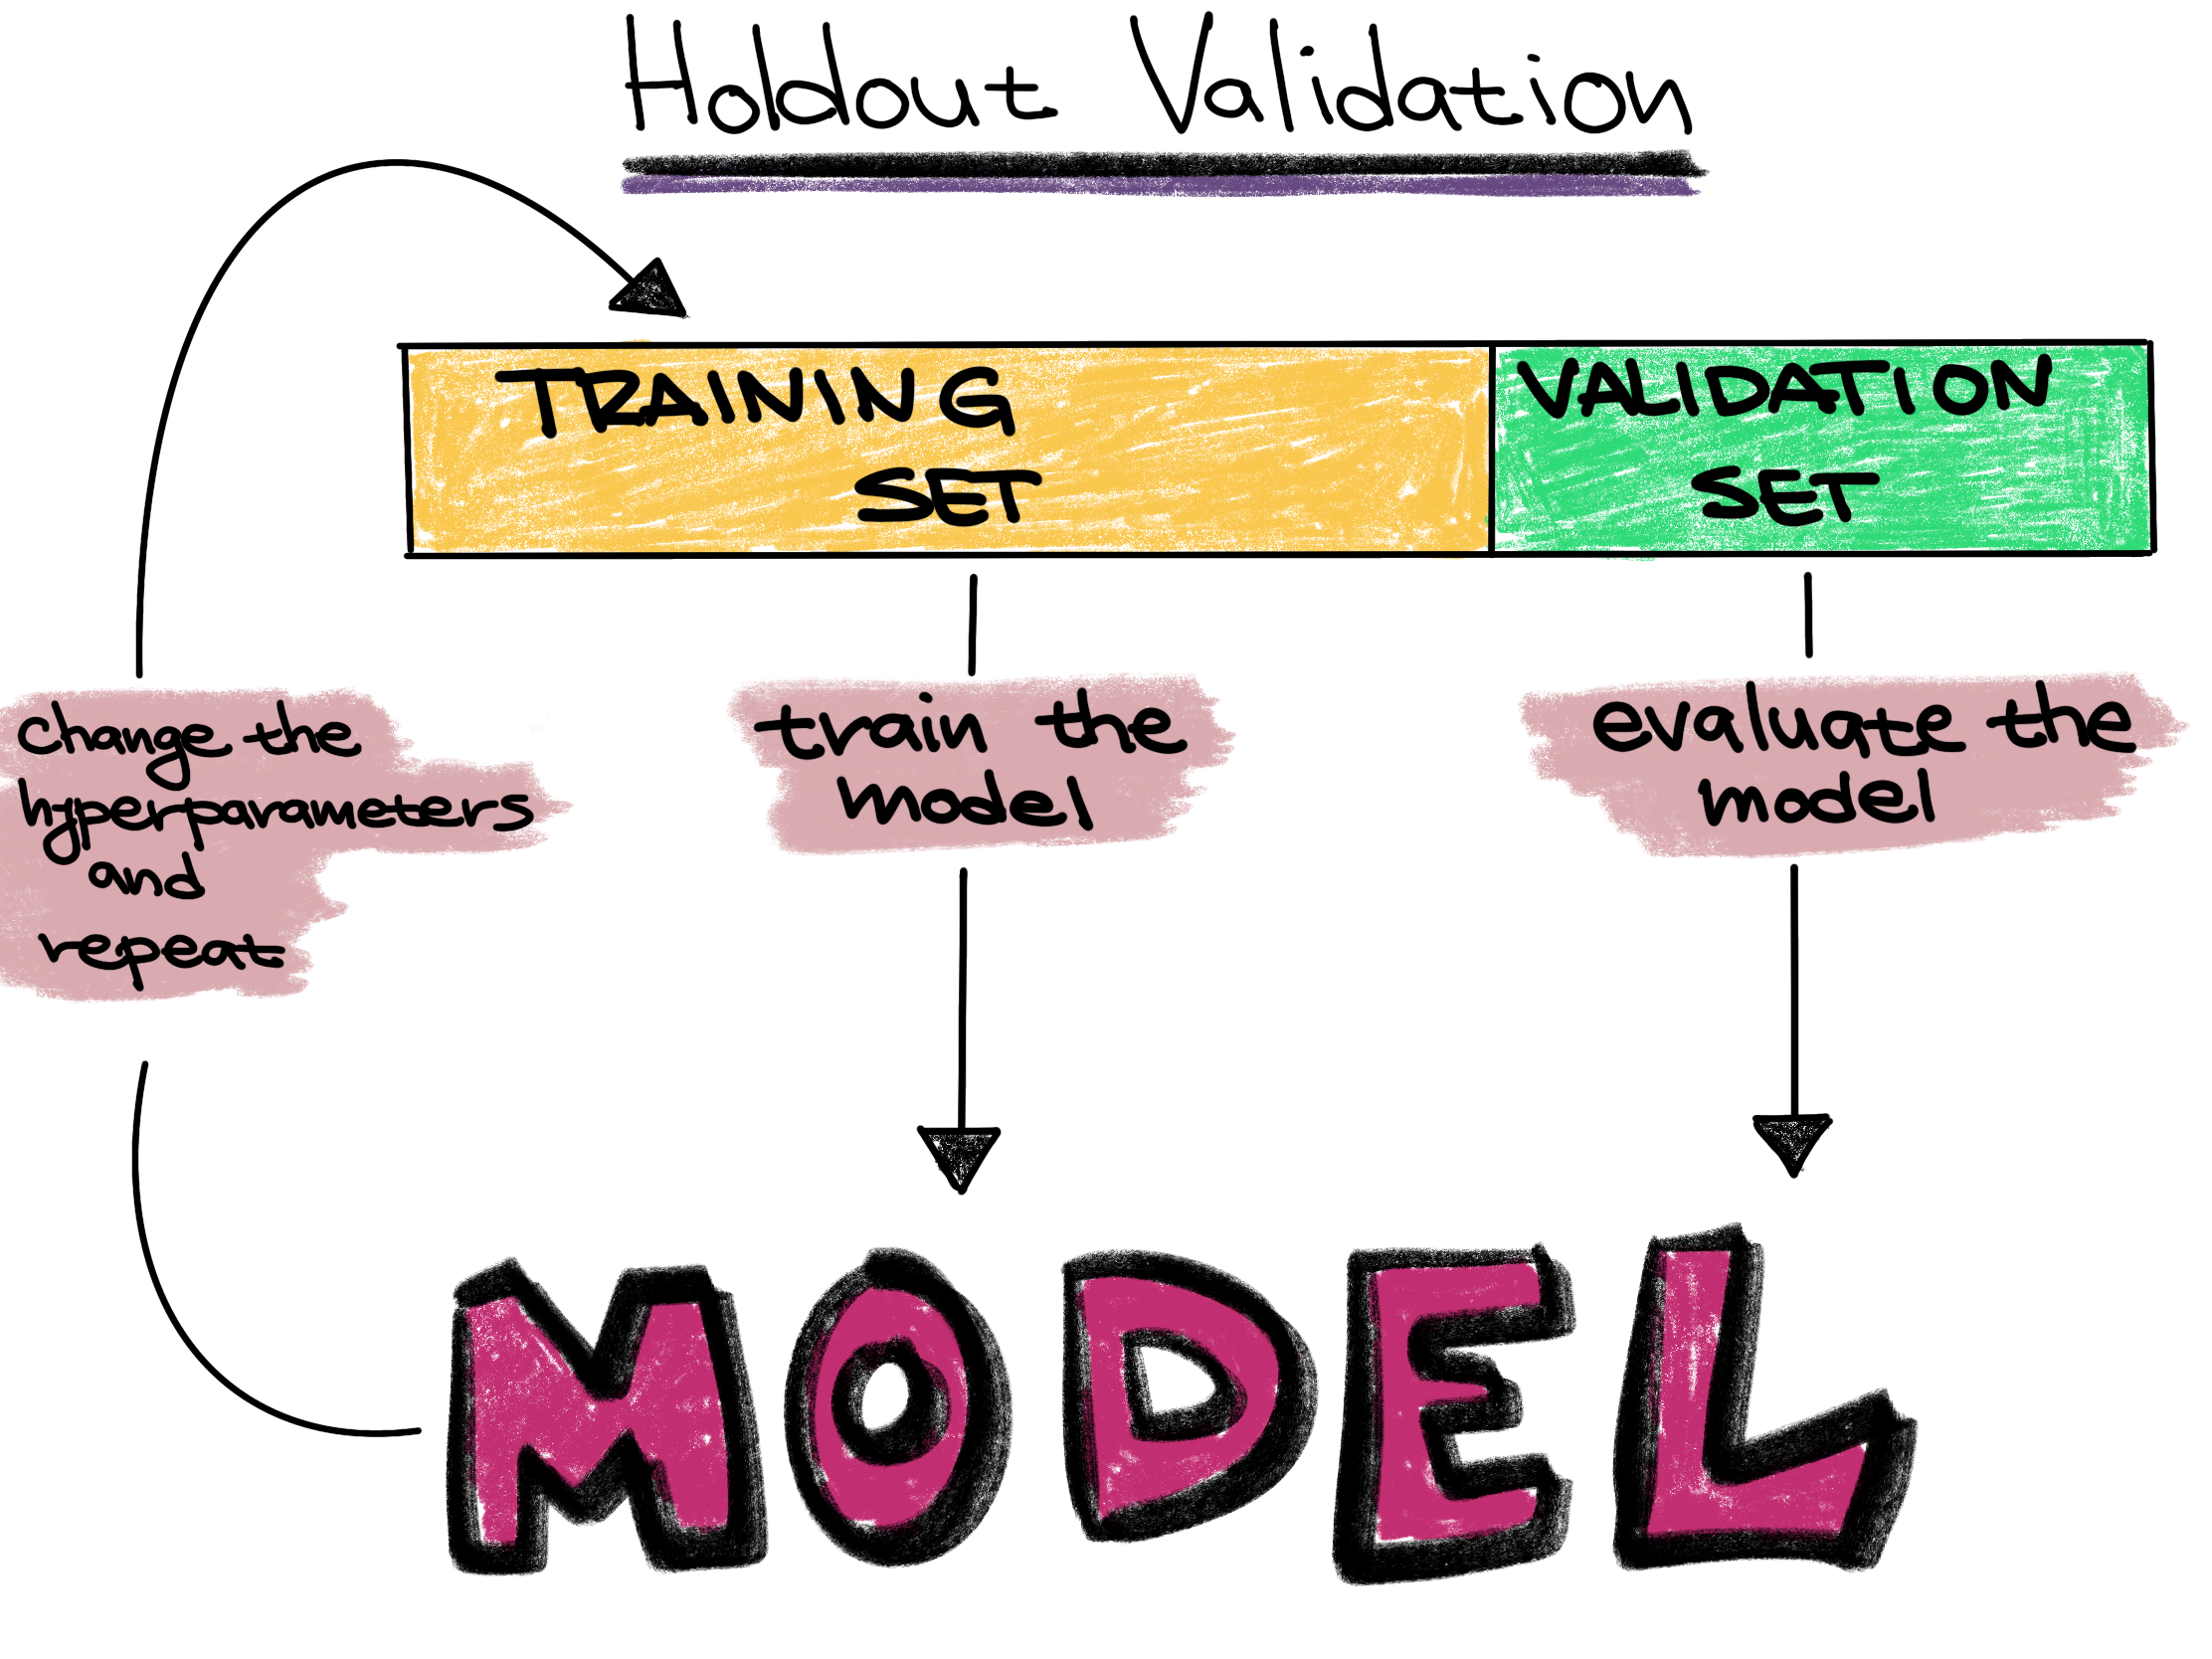 Holdout validation strategy